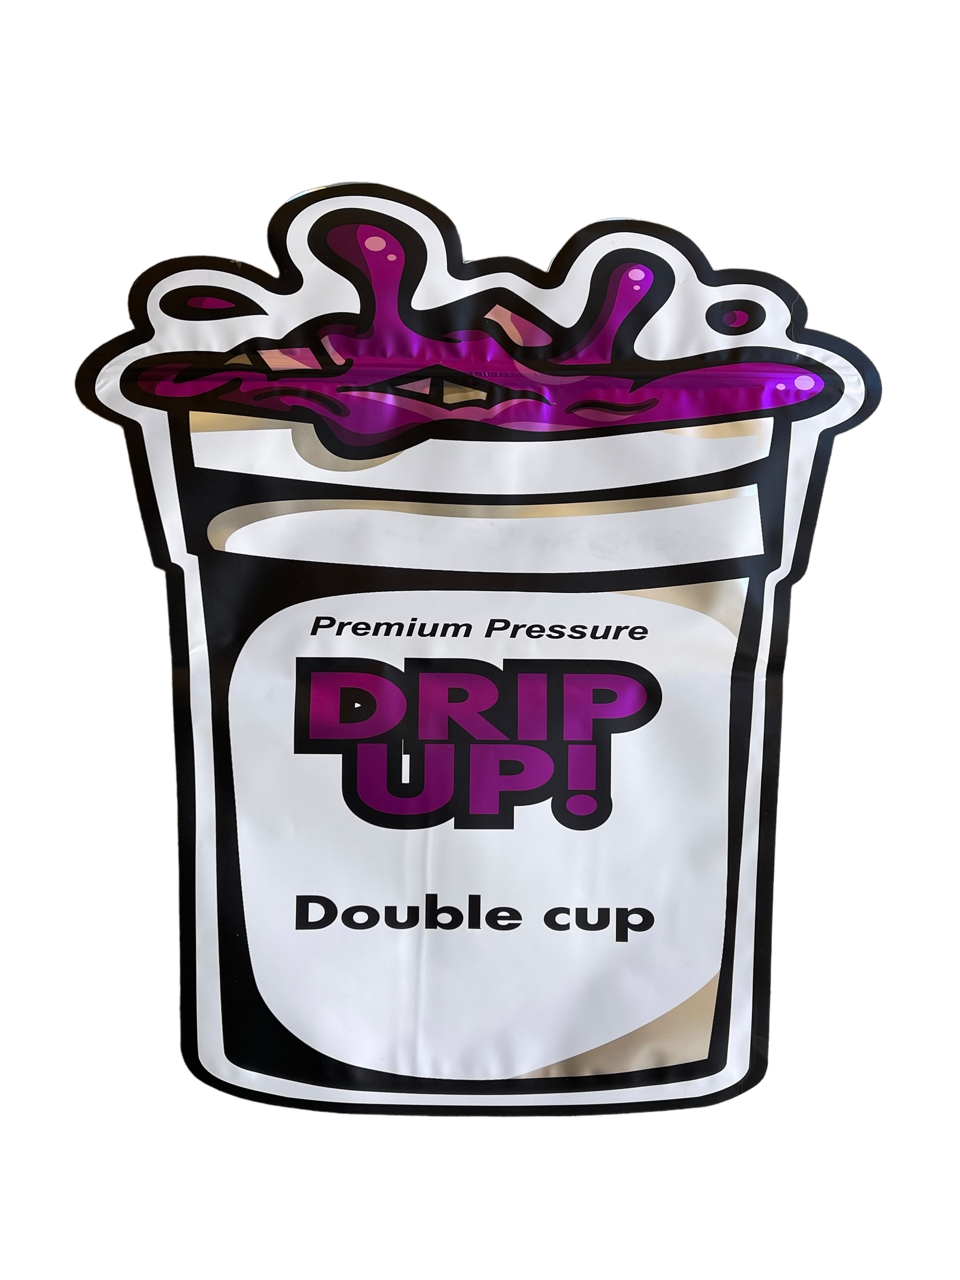 Drip Up Pound Bag (Large) 1LBS - 16OZ (454g) Double Cup